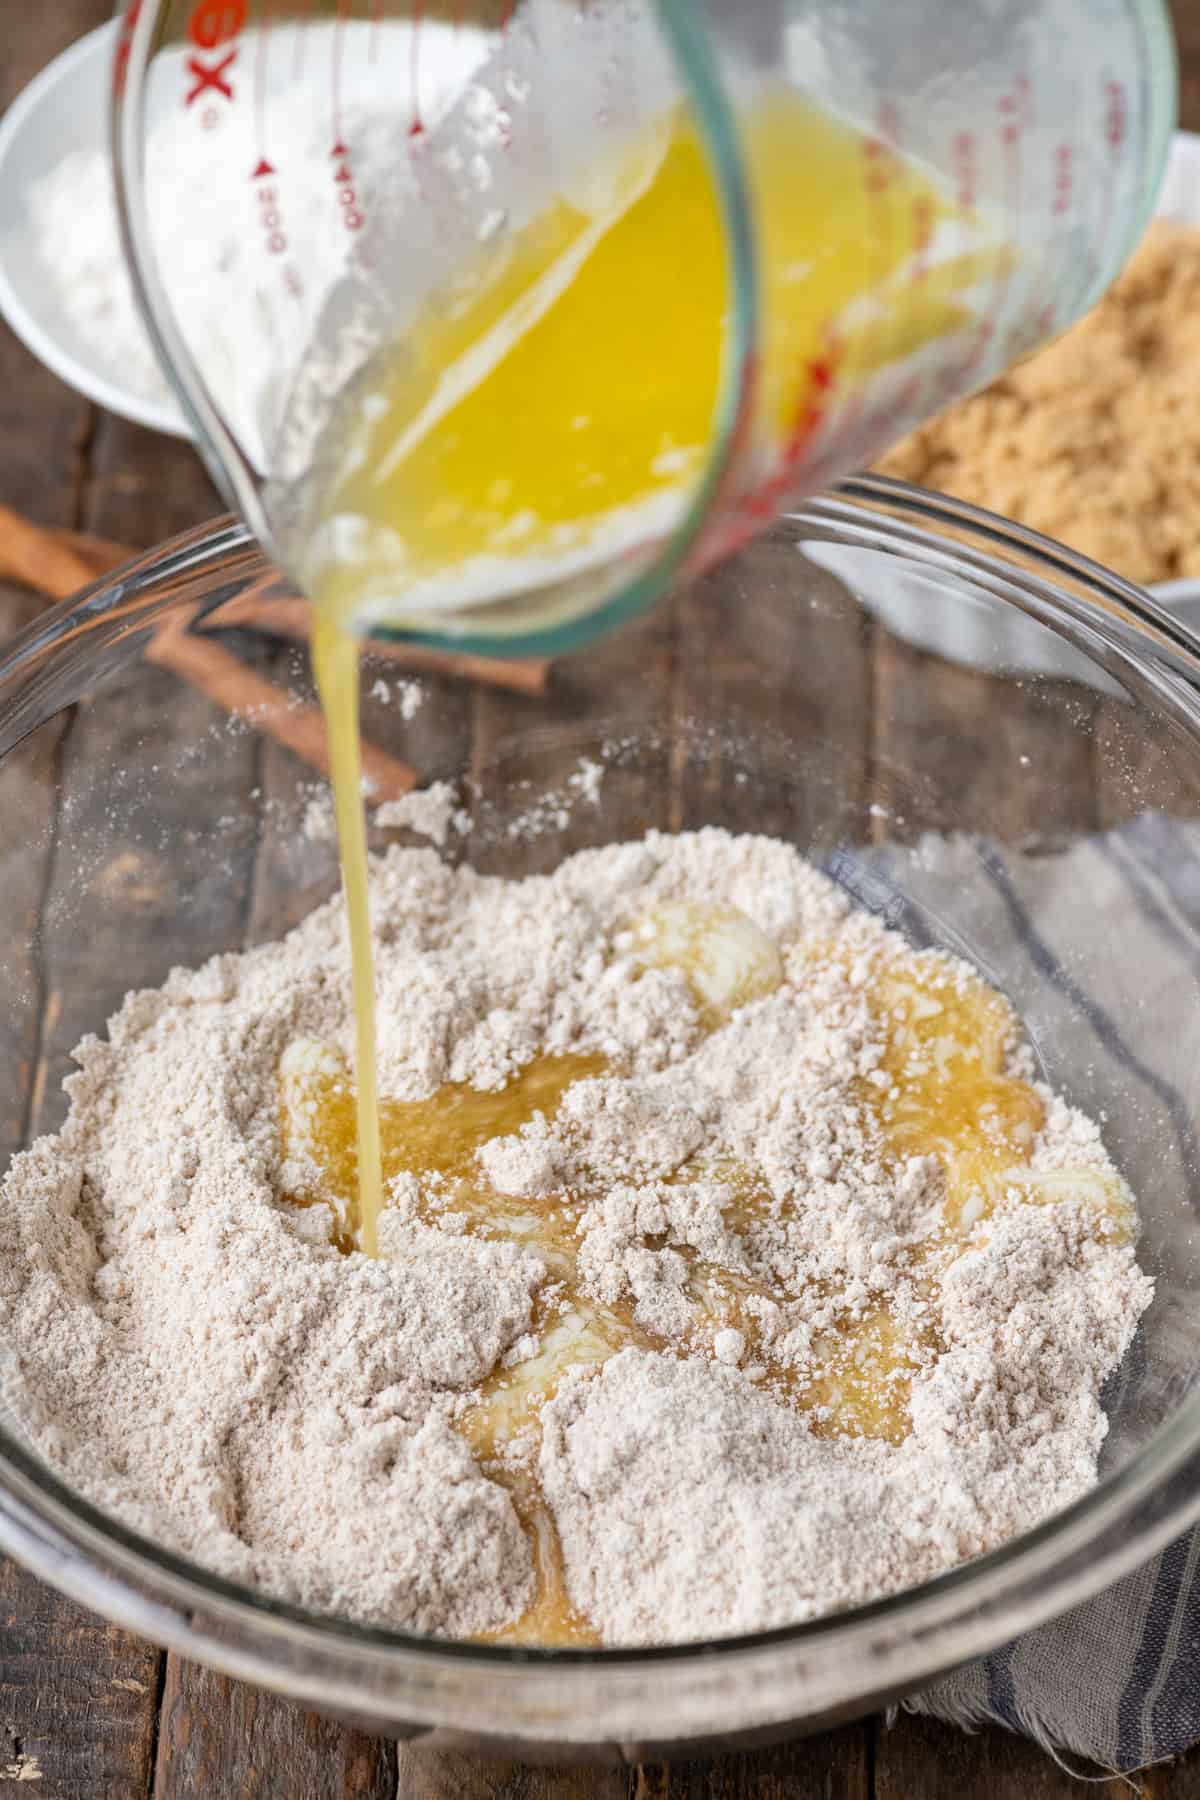 melted butter being poured into glass bowl with crumb topping mixture on wood background